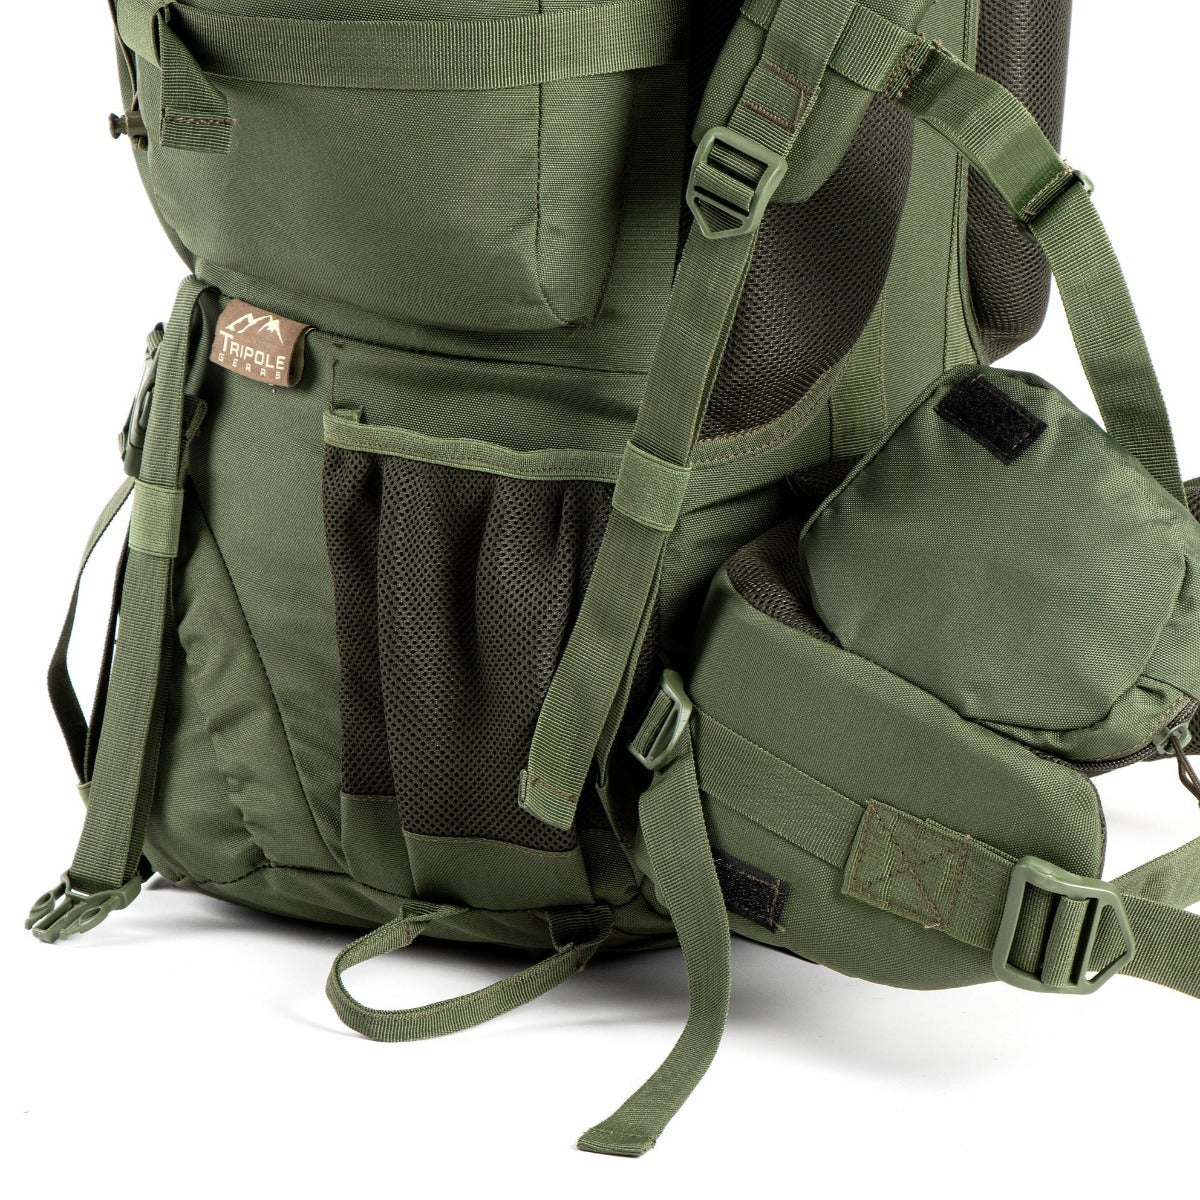 Colonel Series Rucksack + Detachable Day Pack & Rain Cover - 95 Litres - Army Green 8